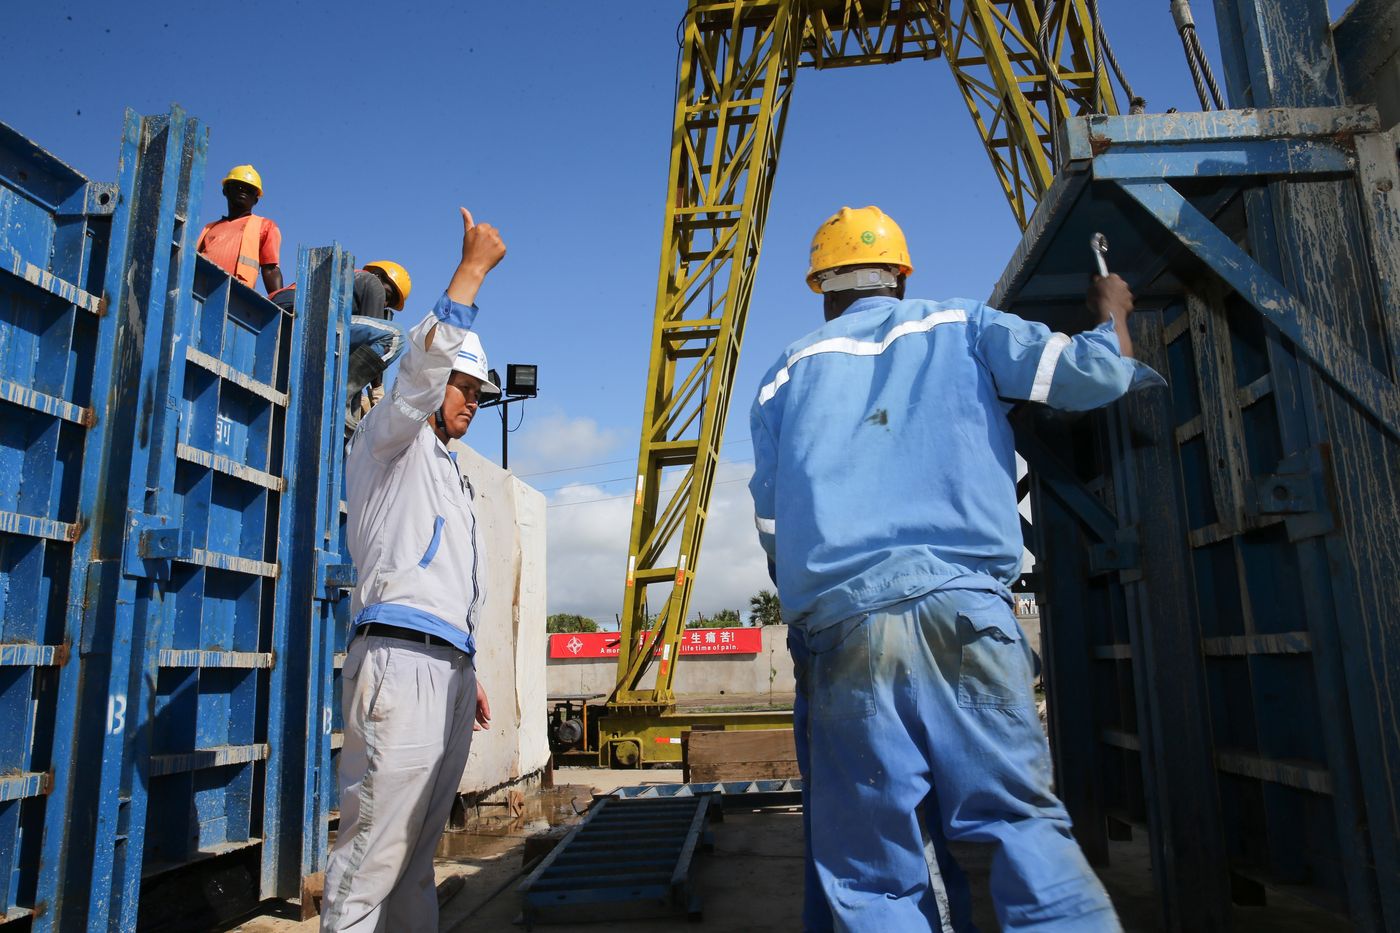 Chinese and Kenyan workers at Lamu Port Project construction site in 2017.